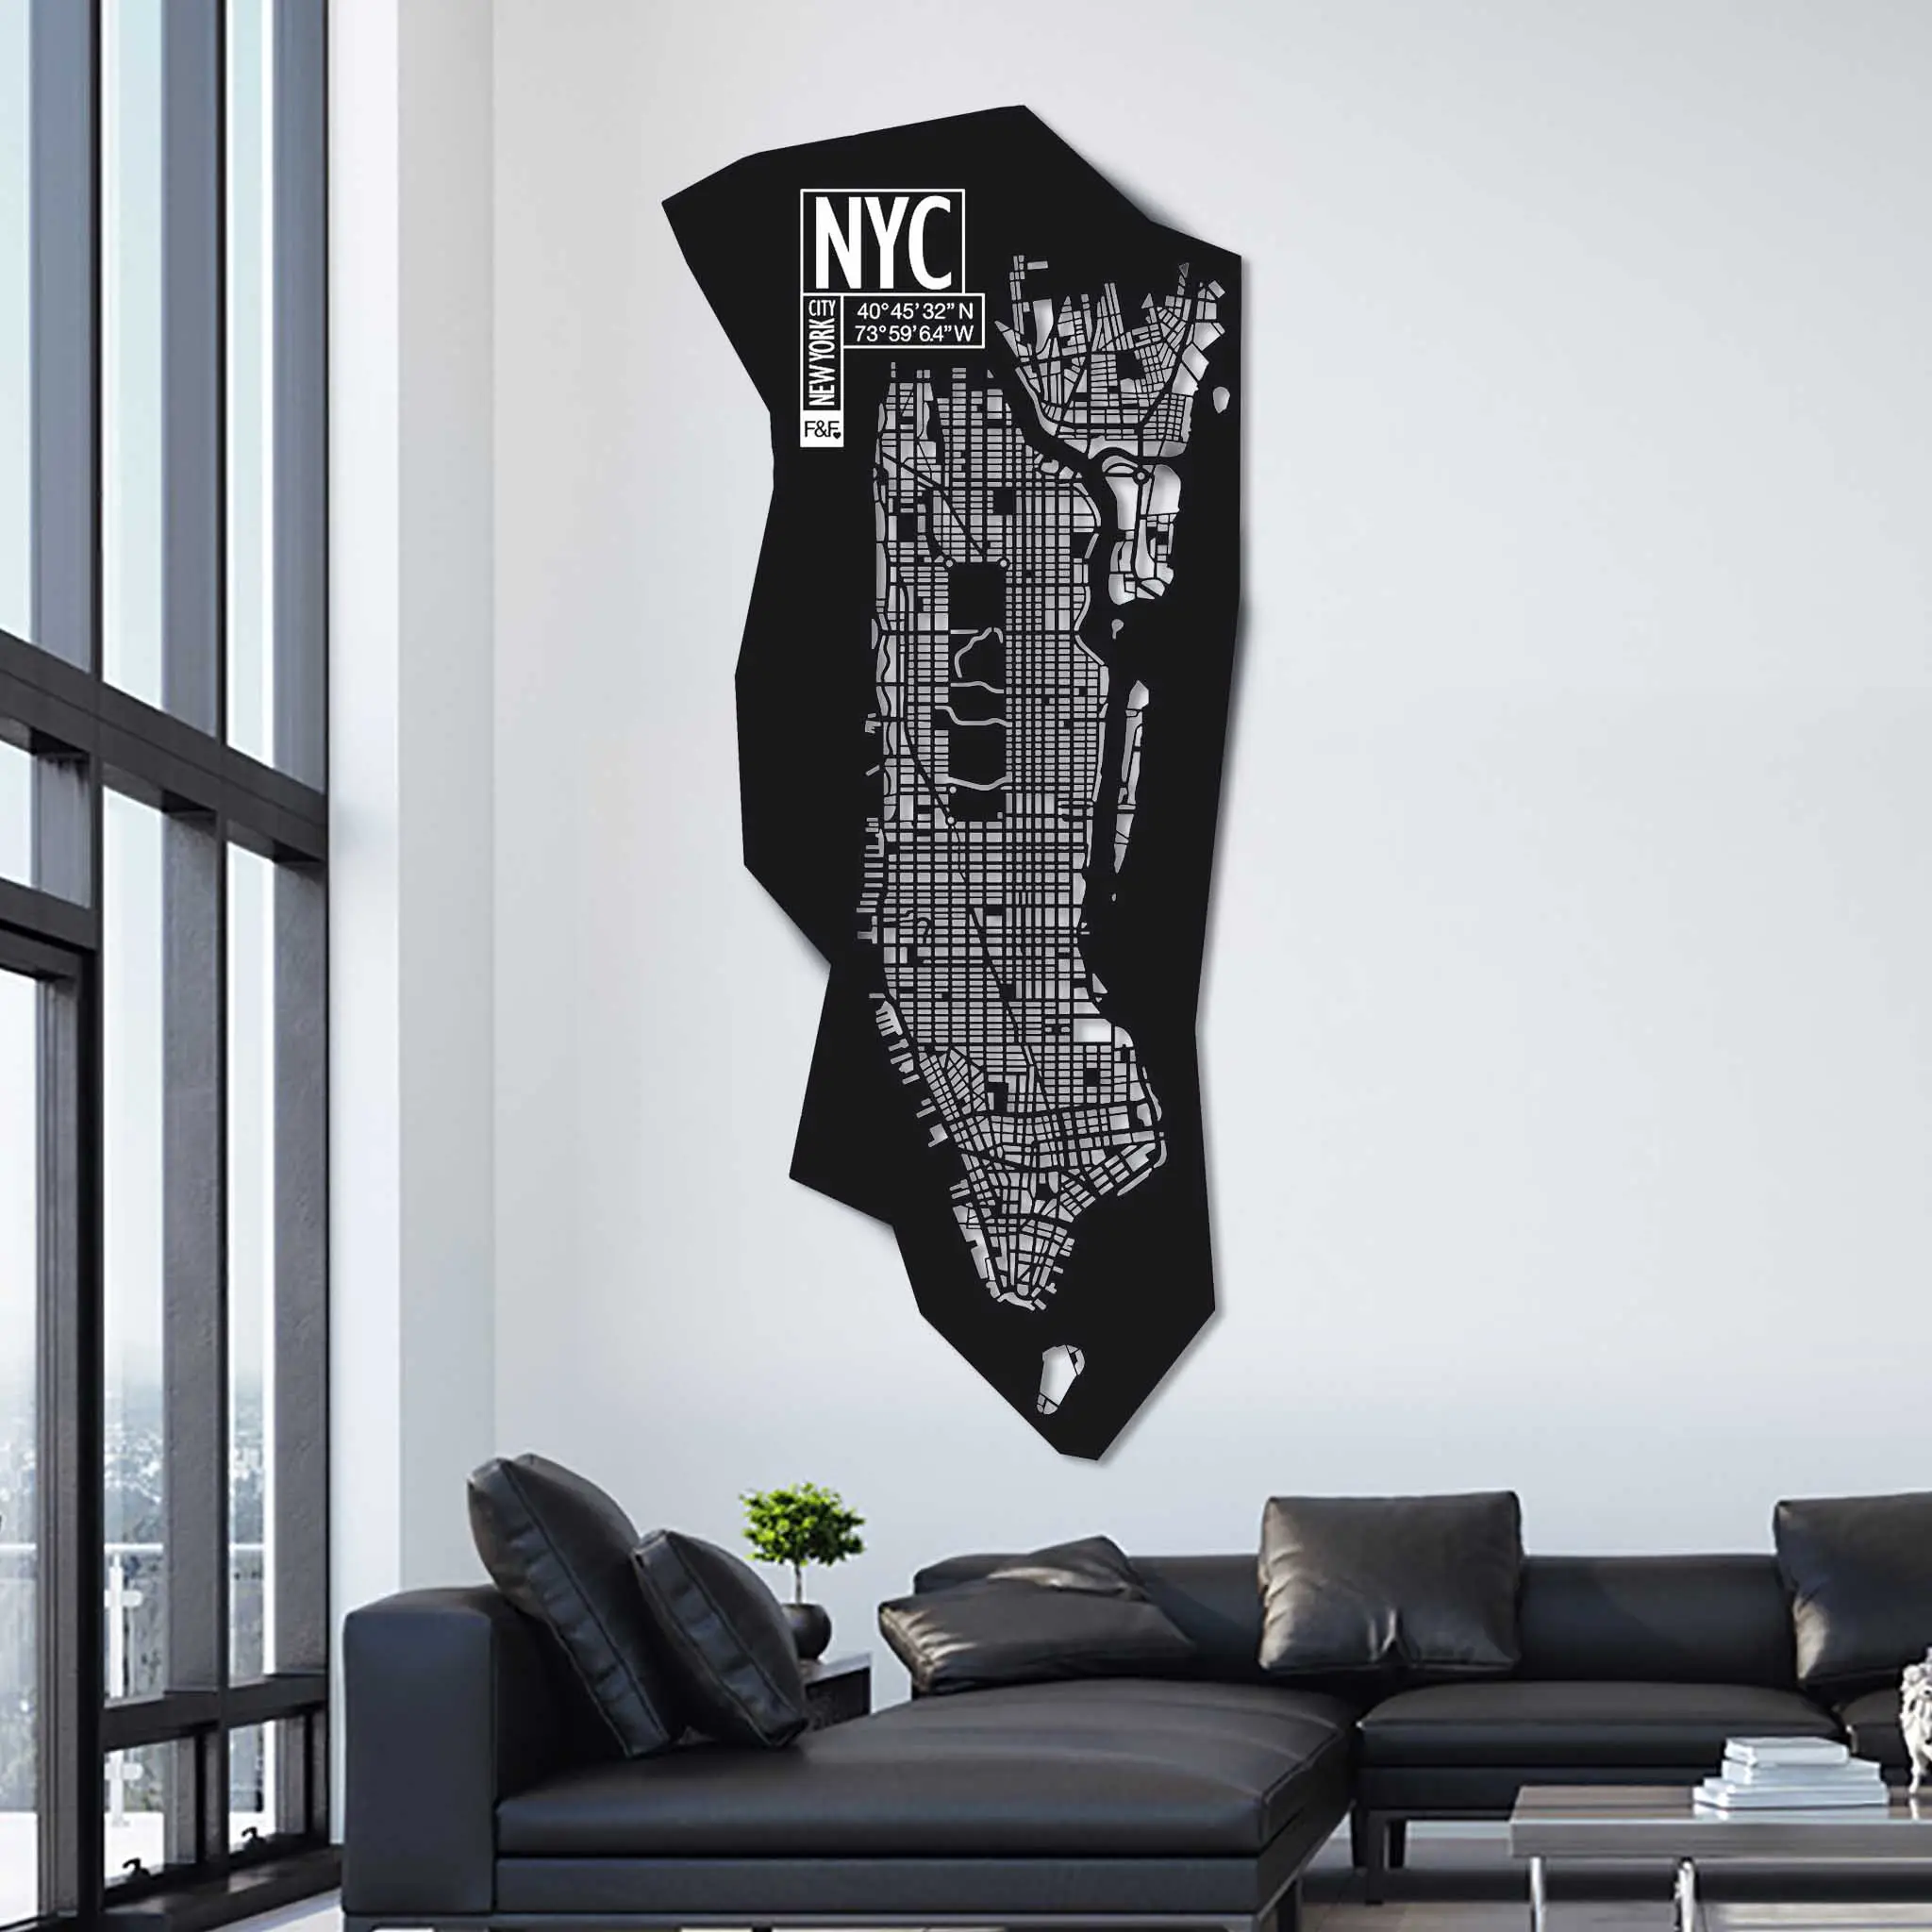 LuxuryL Unique Quality Italian Art Designed Wall Maps Made In Urban Leather New York For Hotel Office Customizable Size